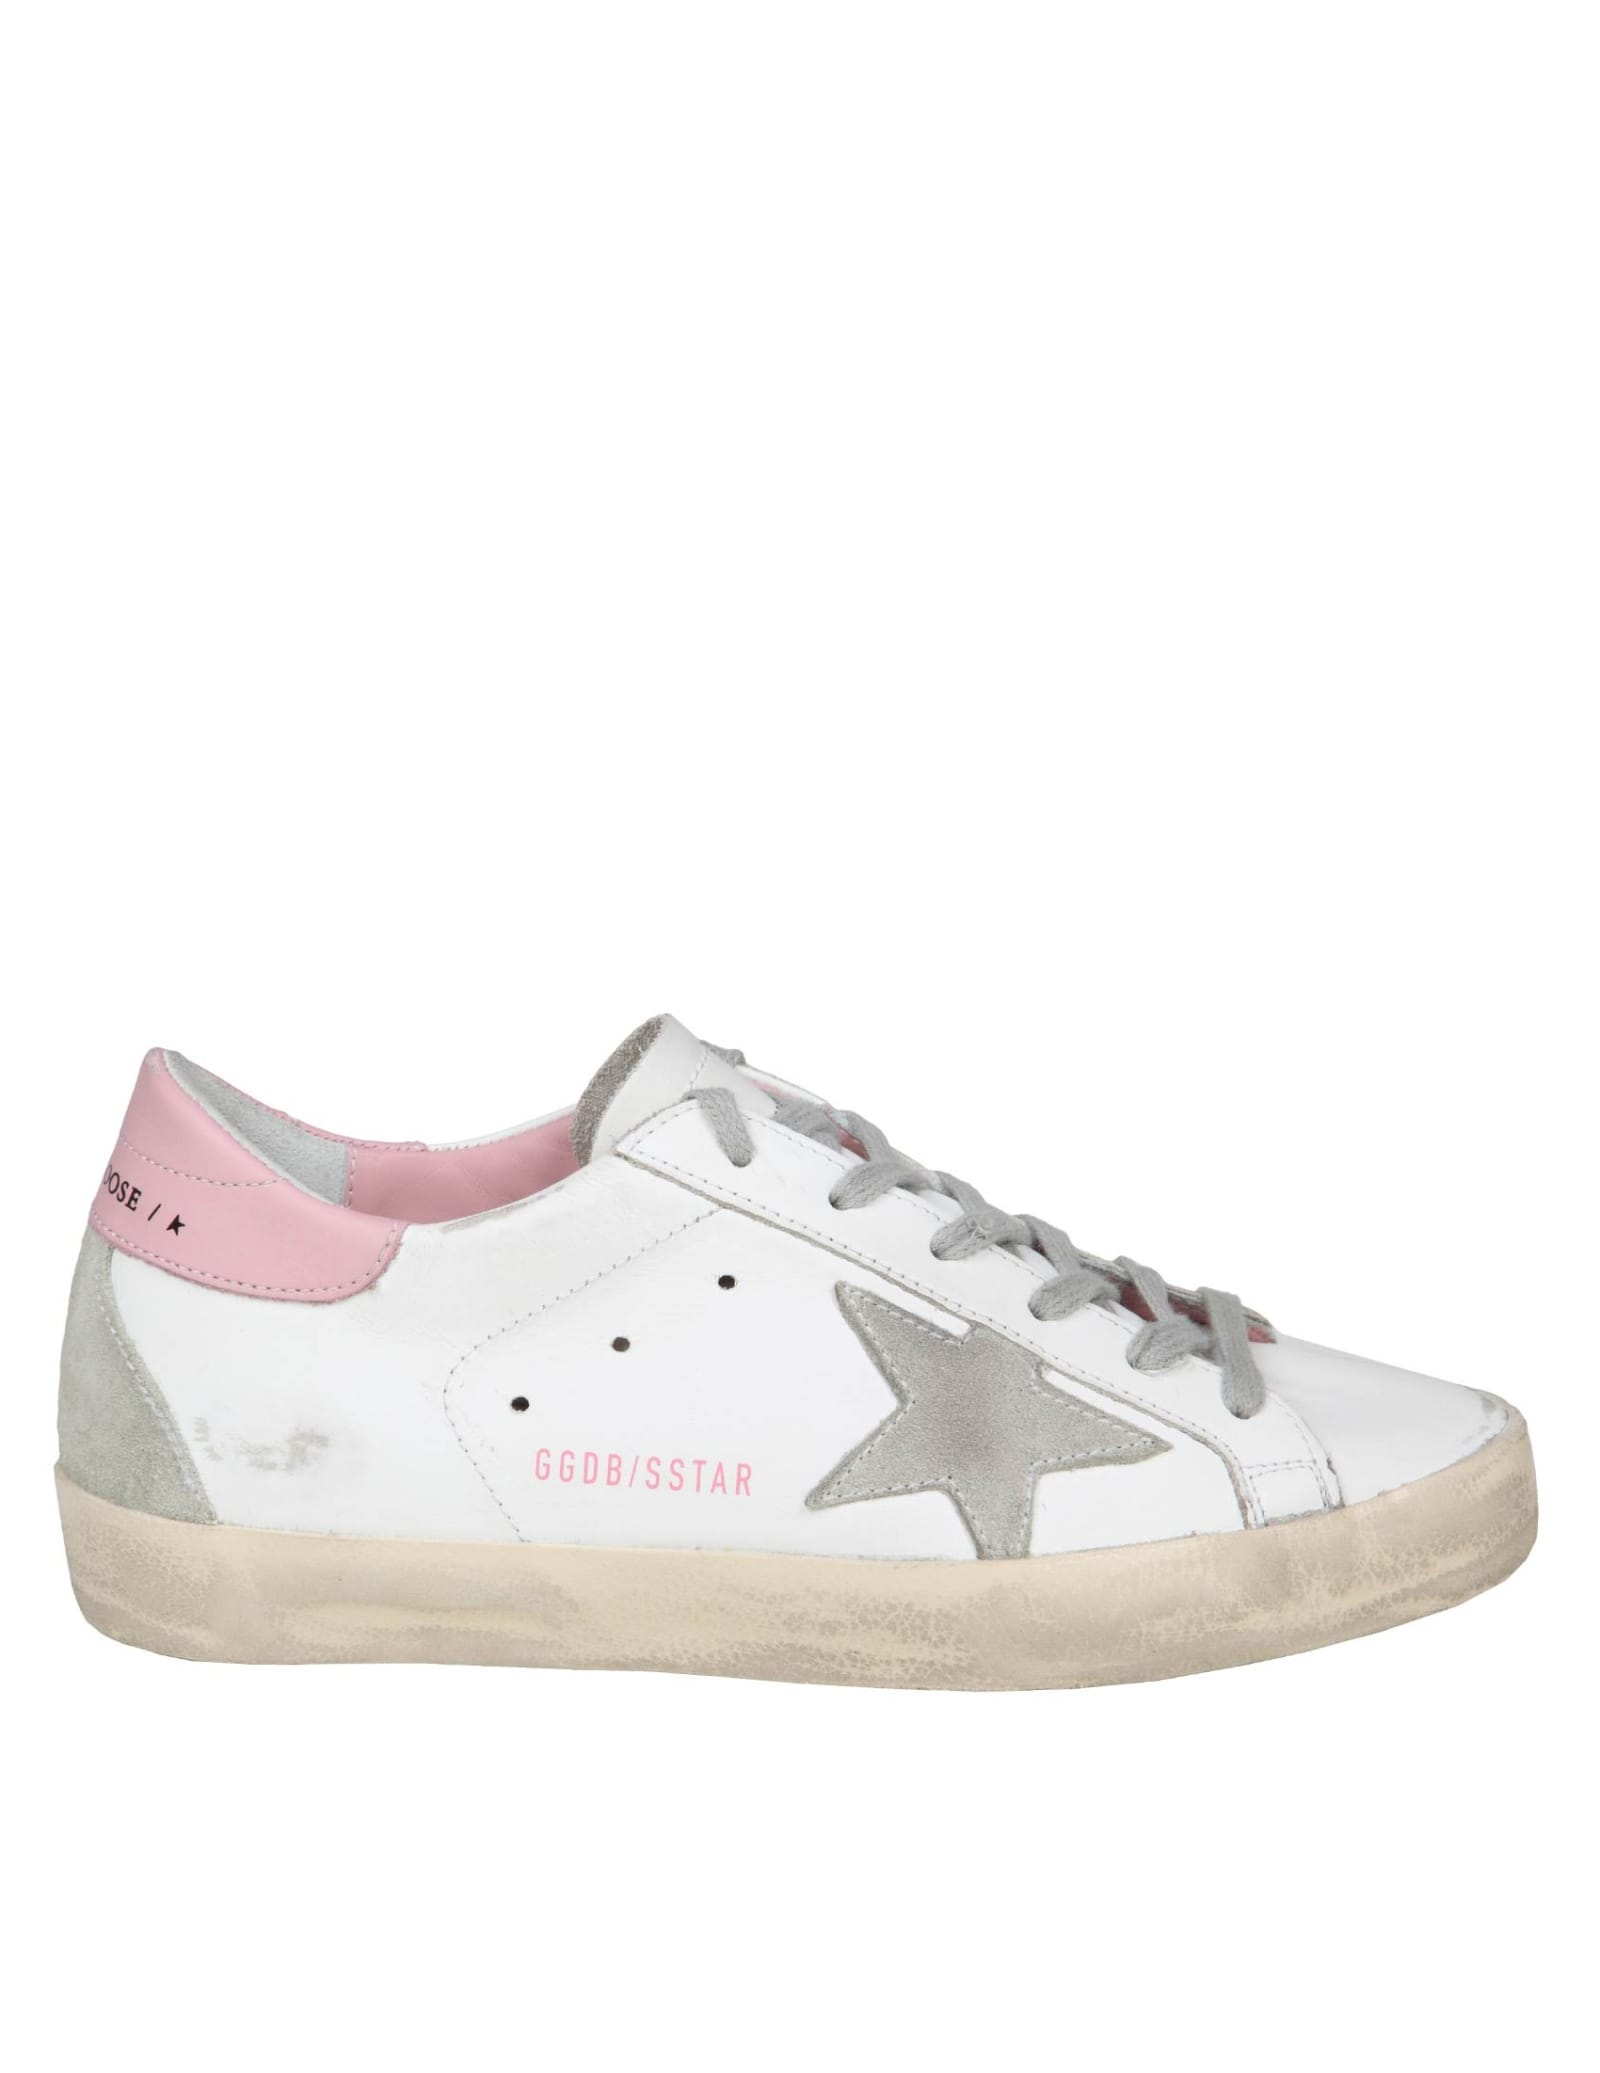 Golden Goose Super Star Sneakers In White And Pink Leather